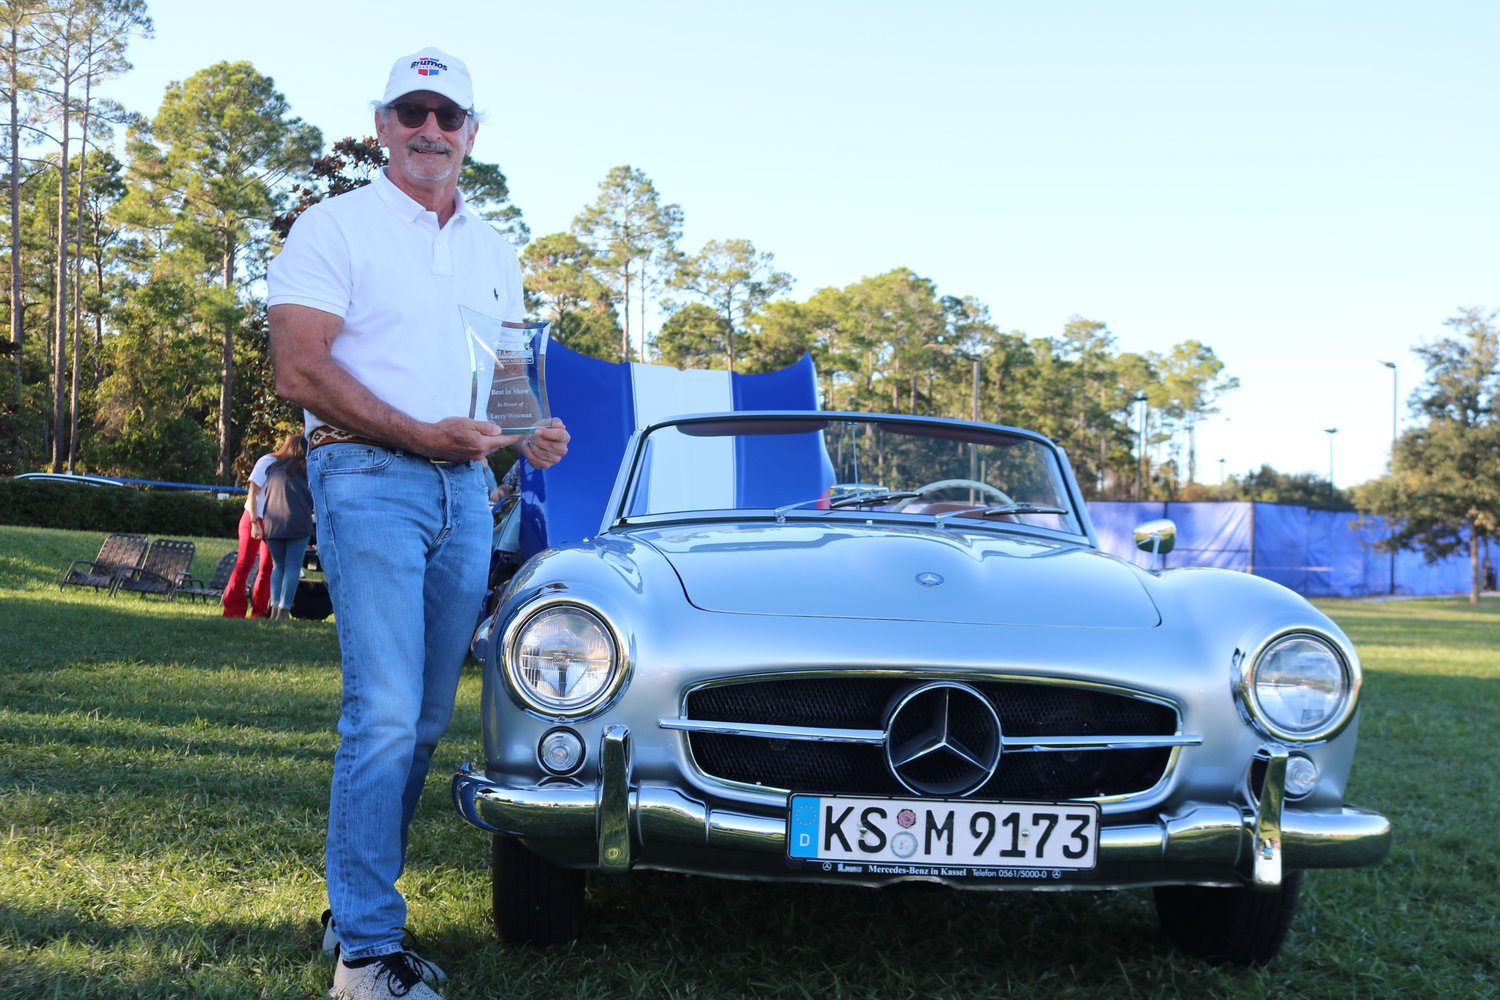 Sam Joiner and his 1961 Mercedes-Benz 190SL were named the overall winner at the 2021 Ponte Vedra Auto Show.